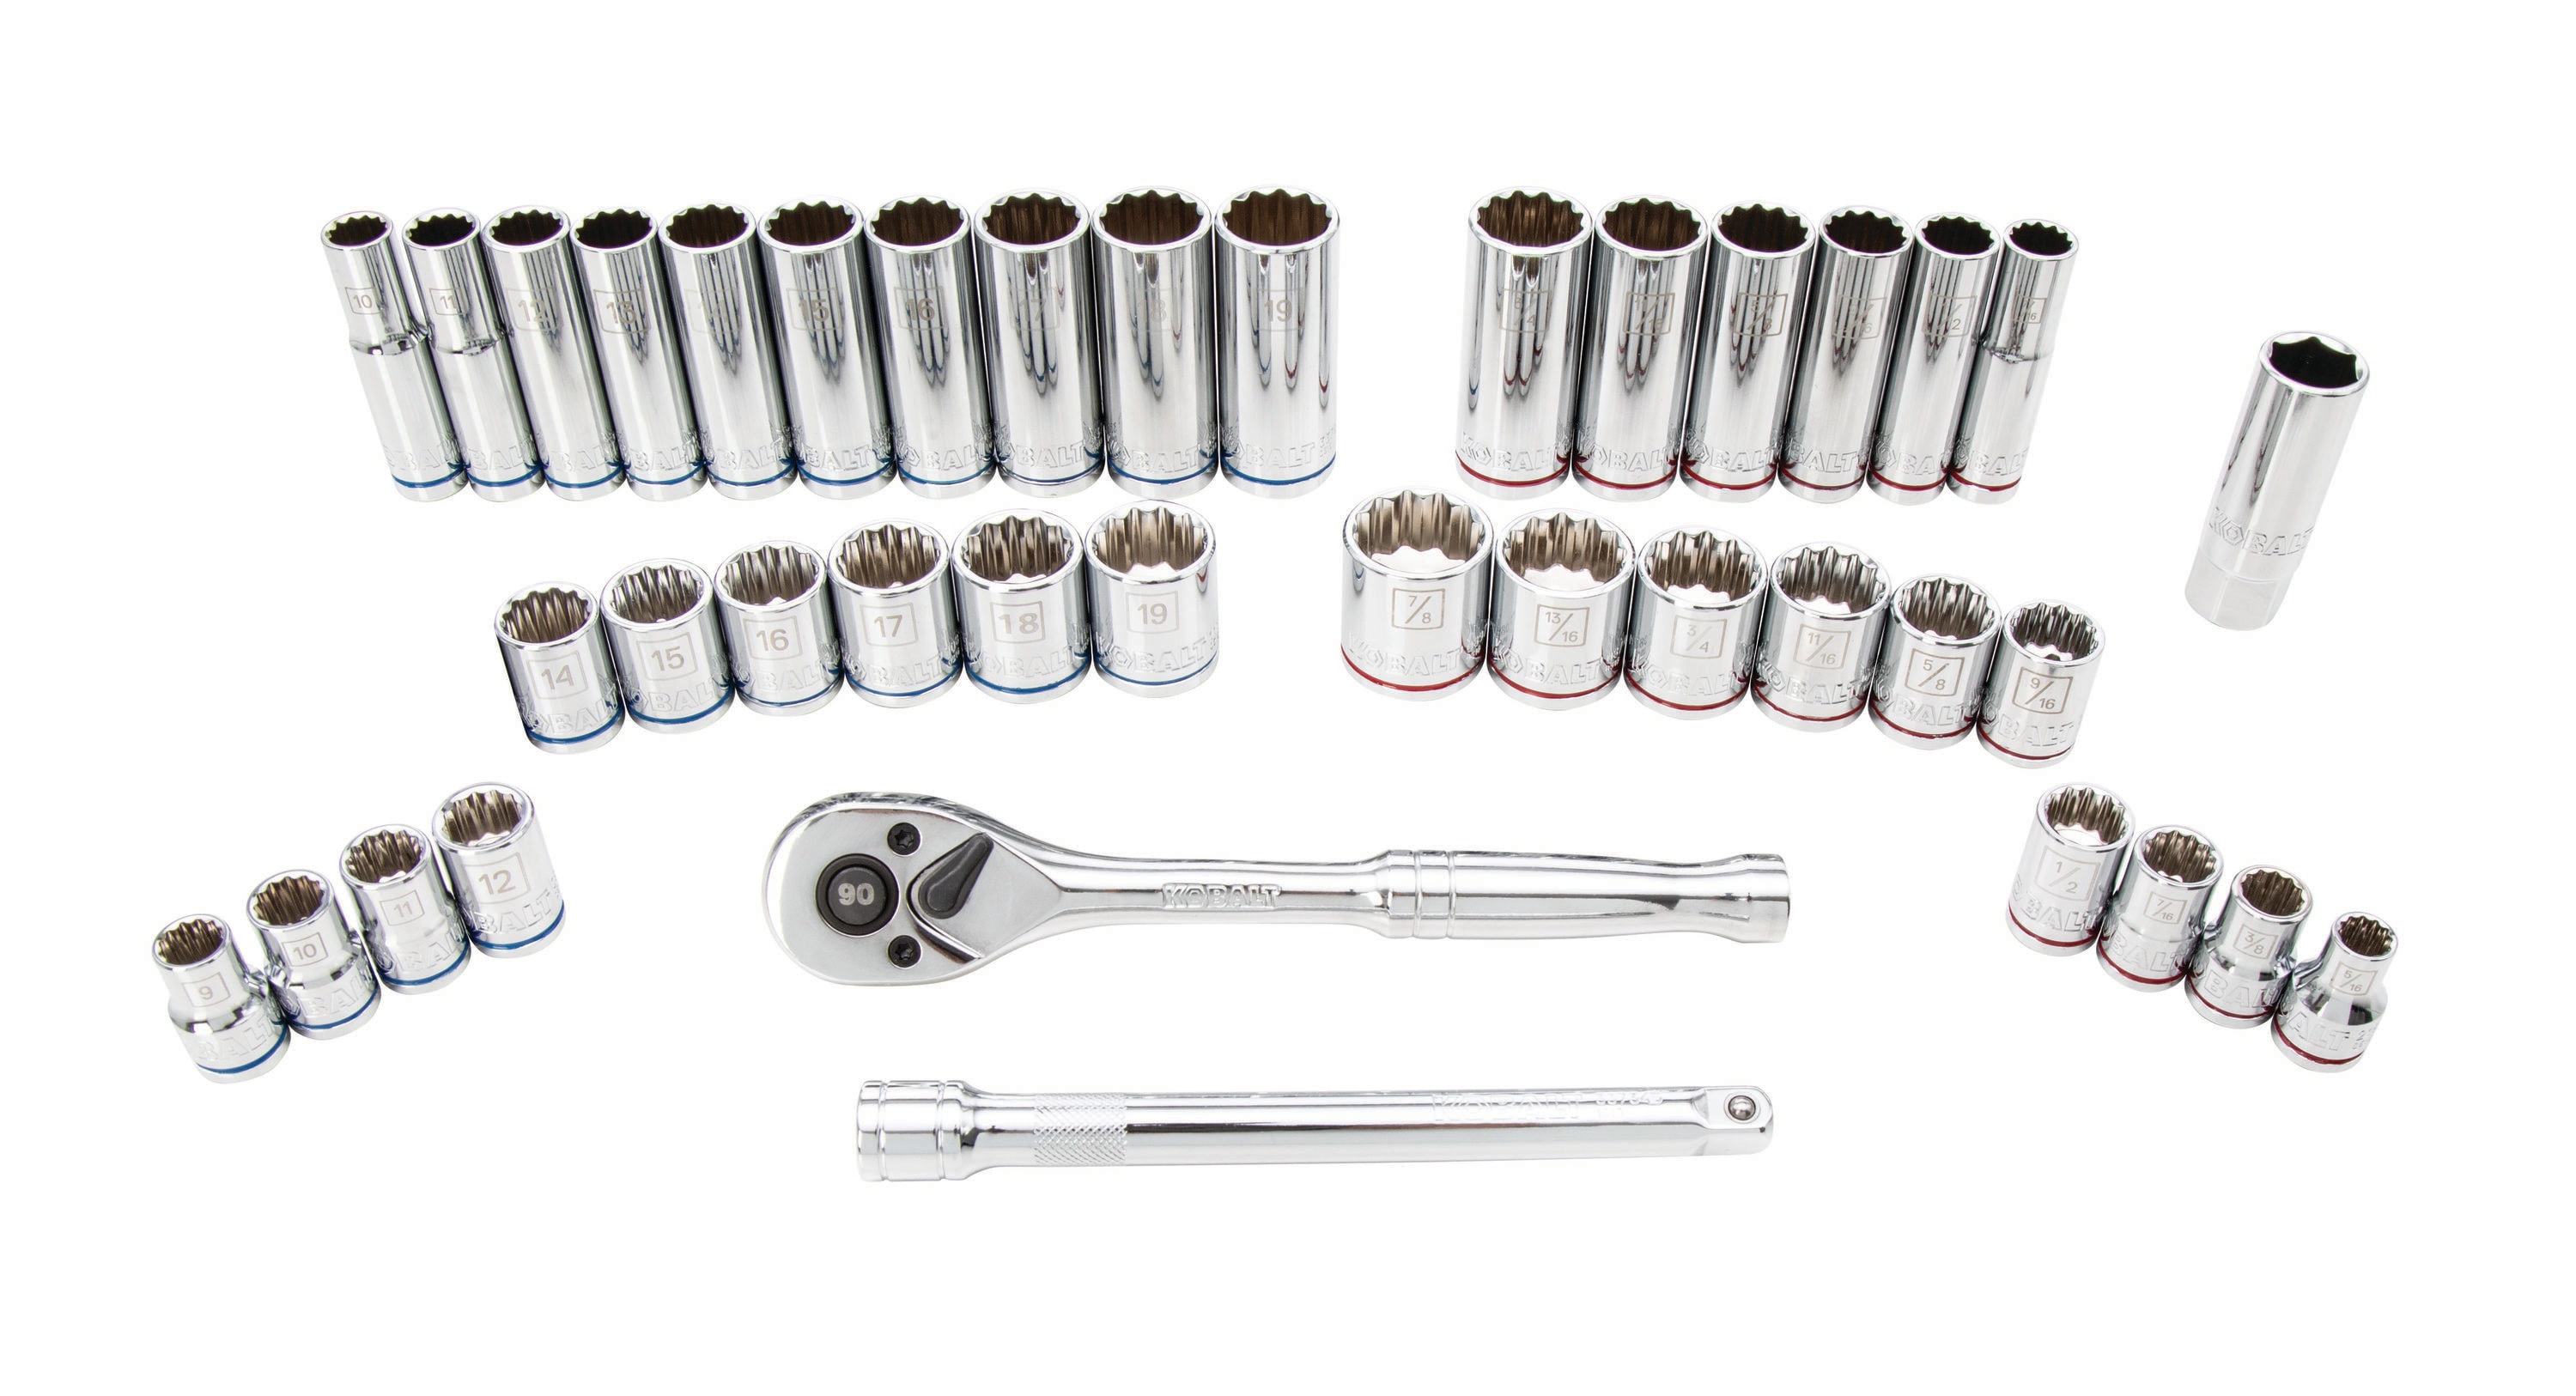 Details about   40 Piece Ratcheting Socket Wrench Set Metric and Standard 6-Point Hex Socket 